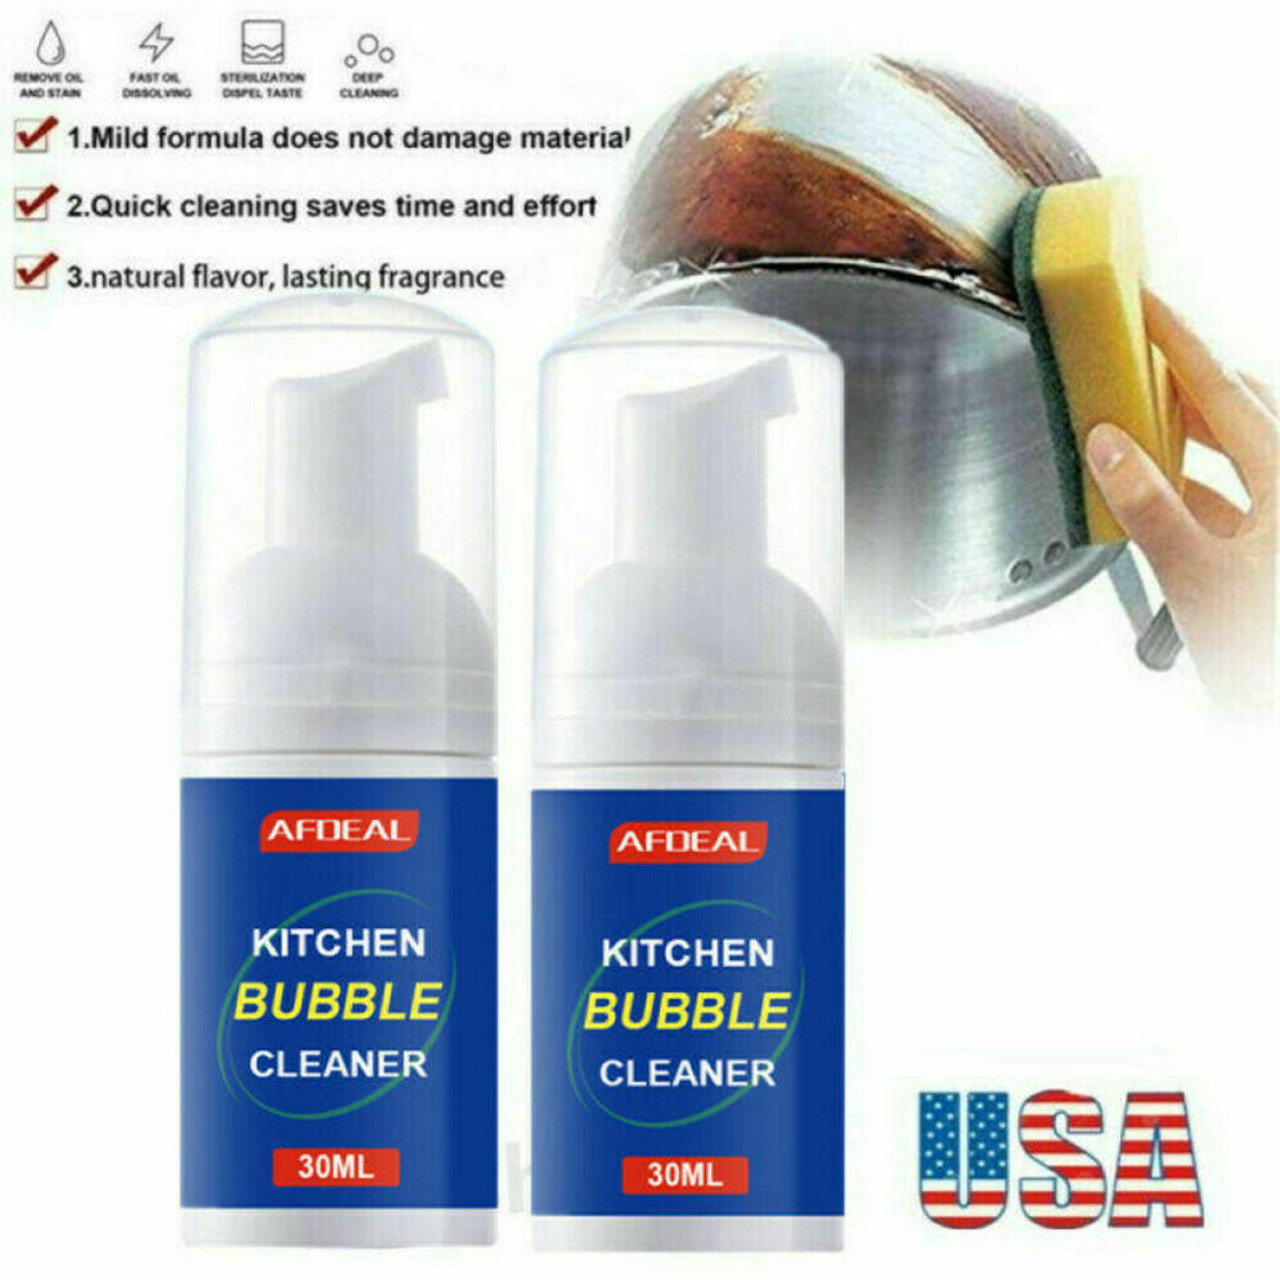 1-5xMulti-Purpose Cleaning Bubble Cleaner Spray Foam Kitchen Grease Dirt  Removal